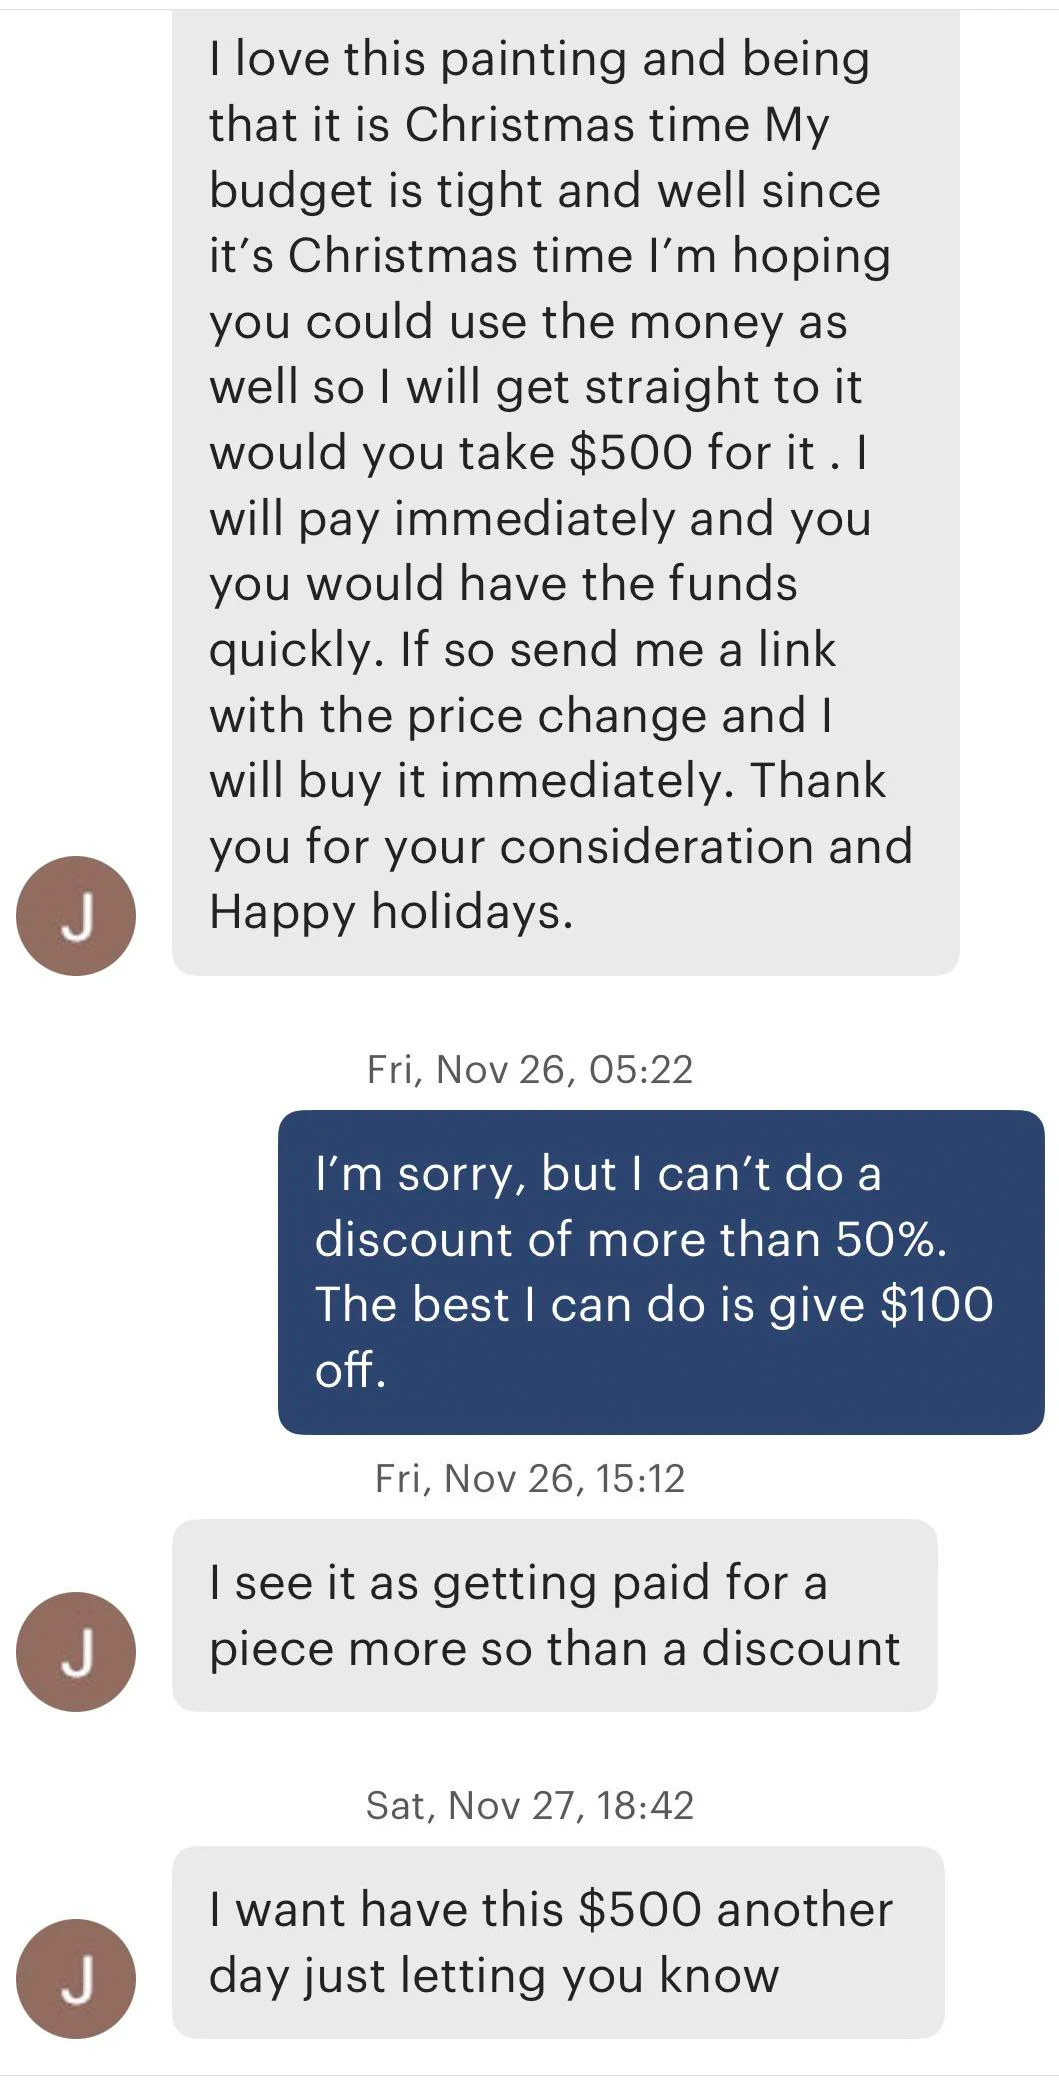 Person asking if someone will take $500 for a painting, and the person says they can&#x27;t accept a more than 50% discount